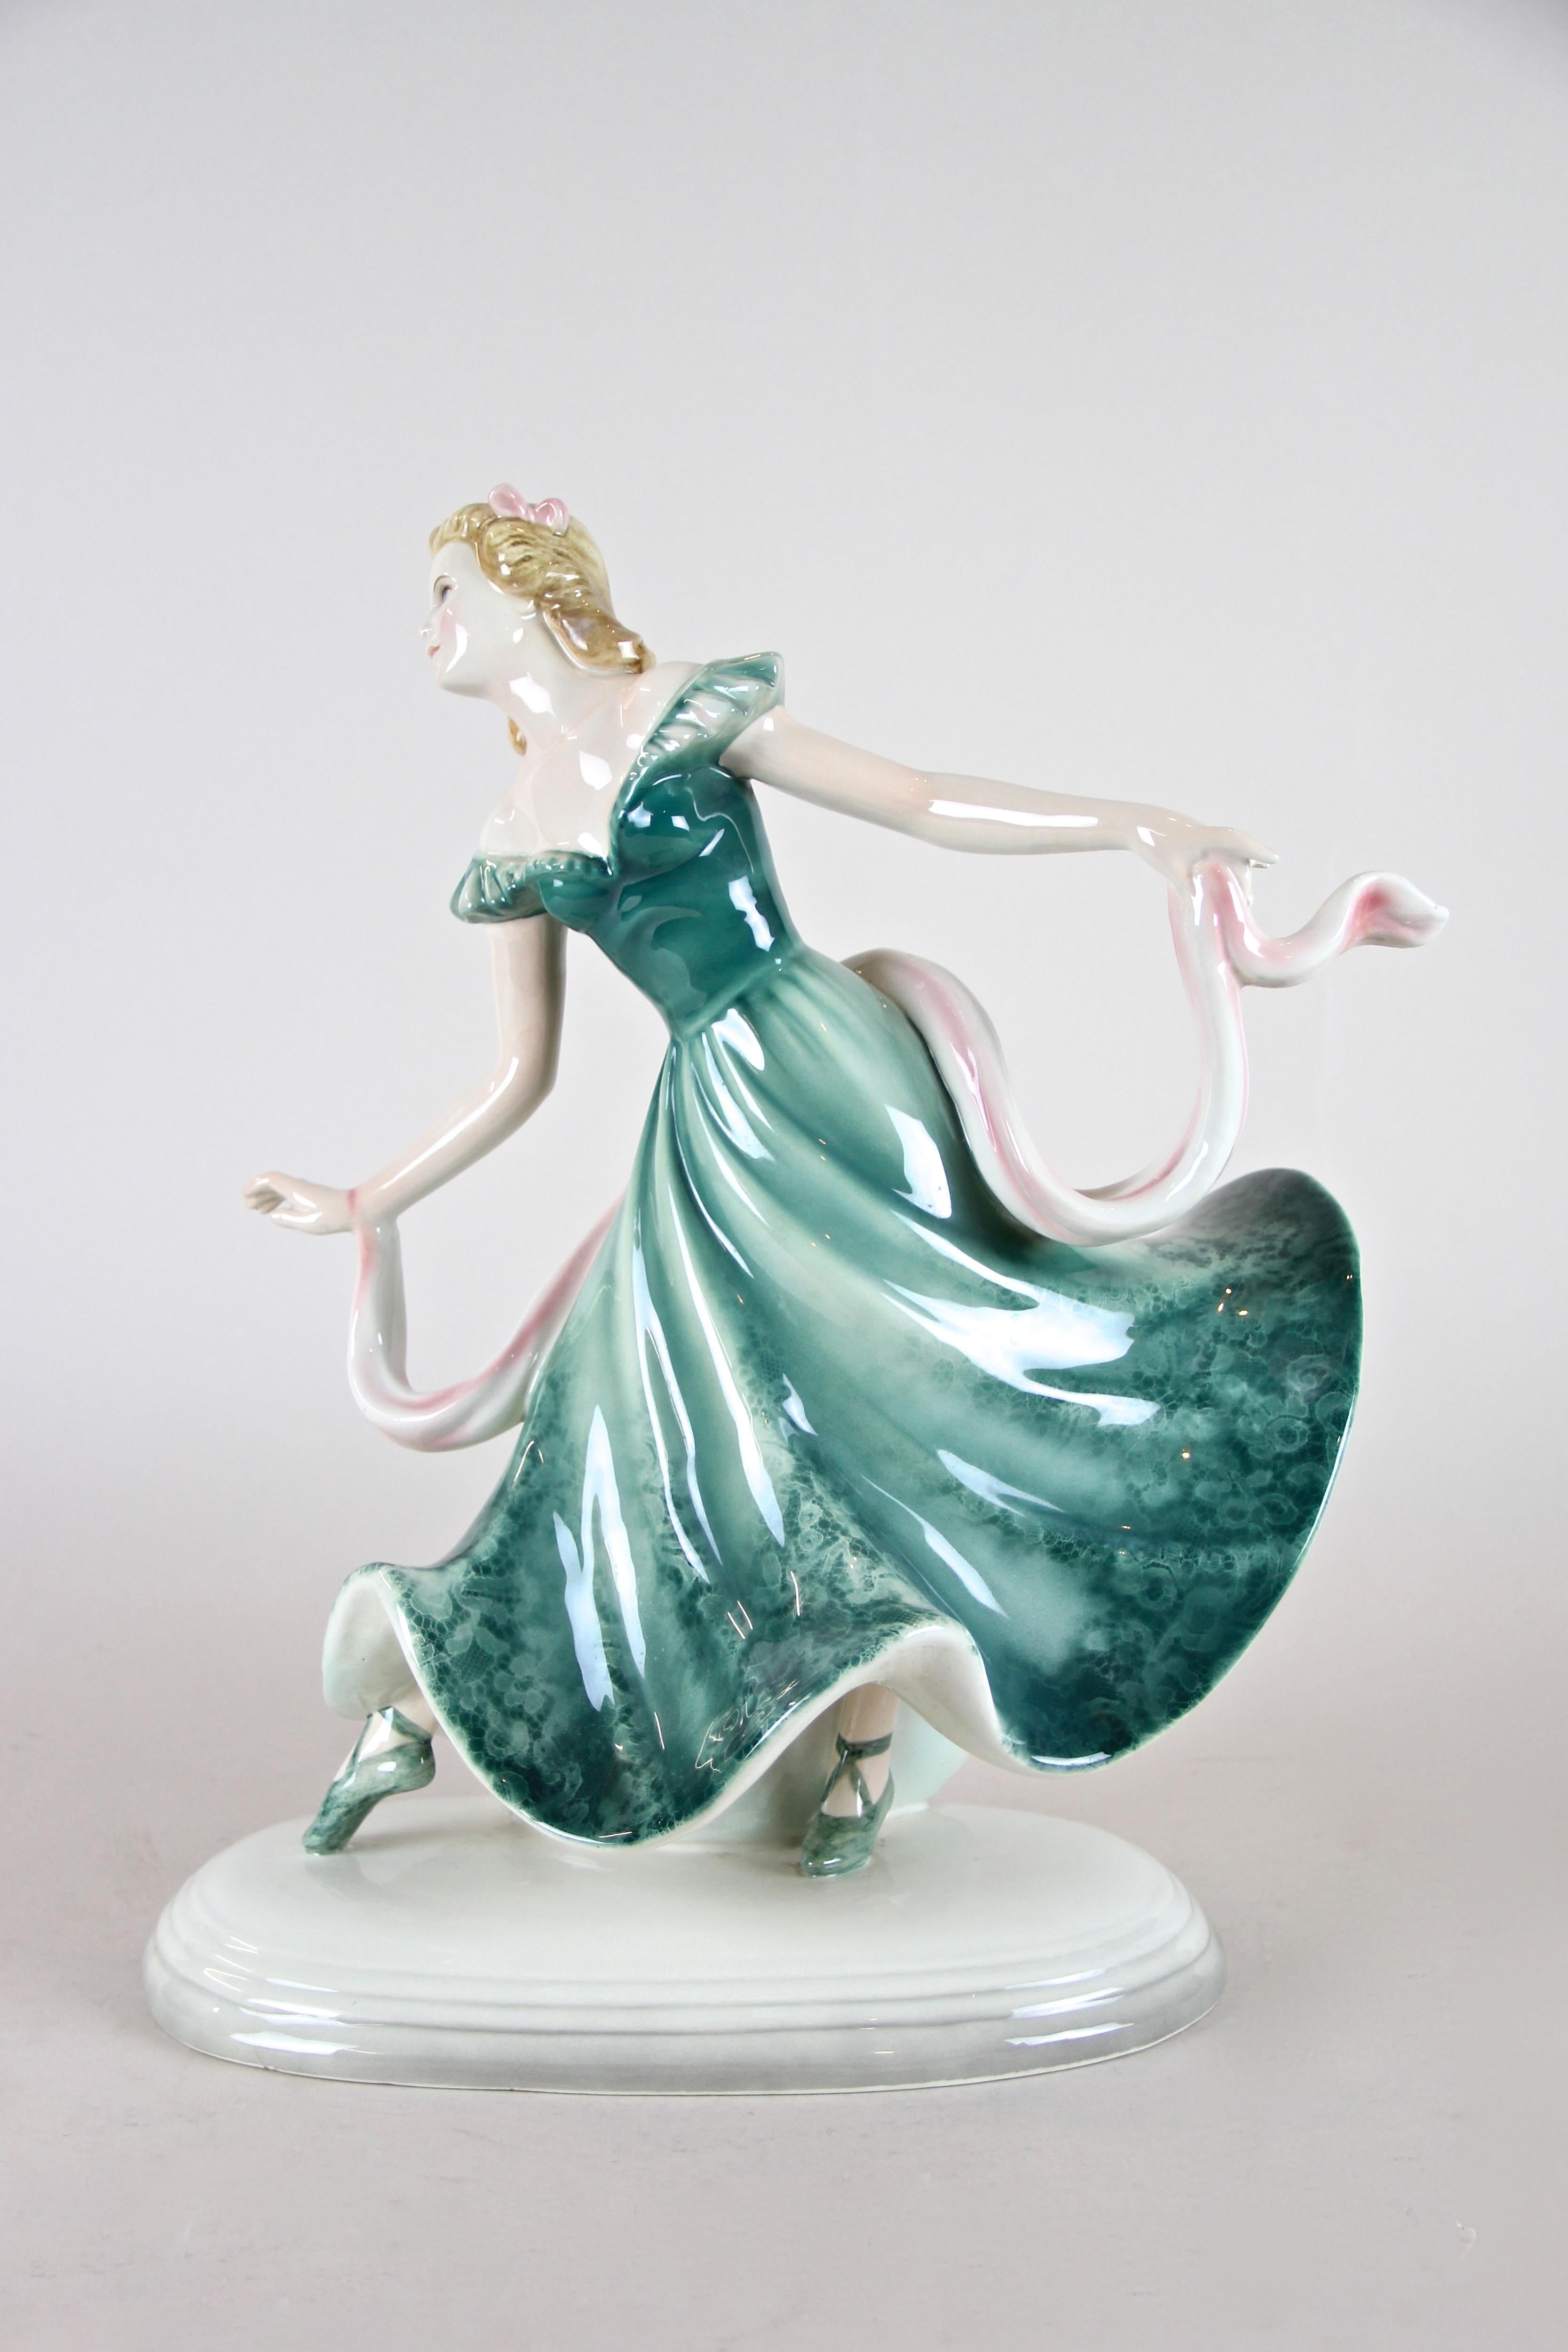 Charming Art Deco Ballerina ceramic sculpture made by Keramos Vienna, Austria, circa 1925. This lovely ceramic sculpture depicts a pretty ballerina in a rare version with a very fine, out of the ordinary painted green dress, holding a white/pink